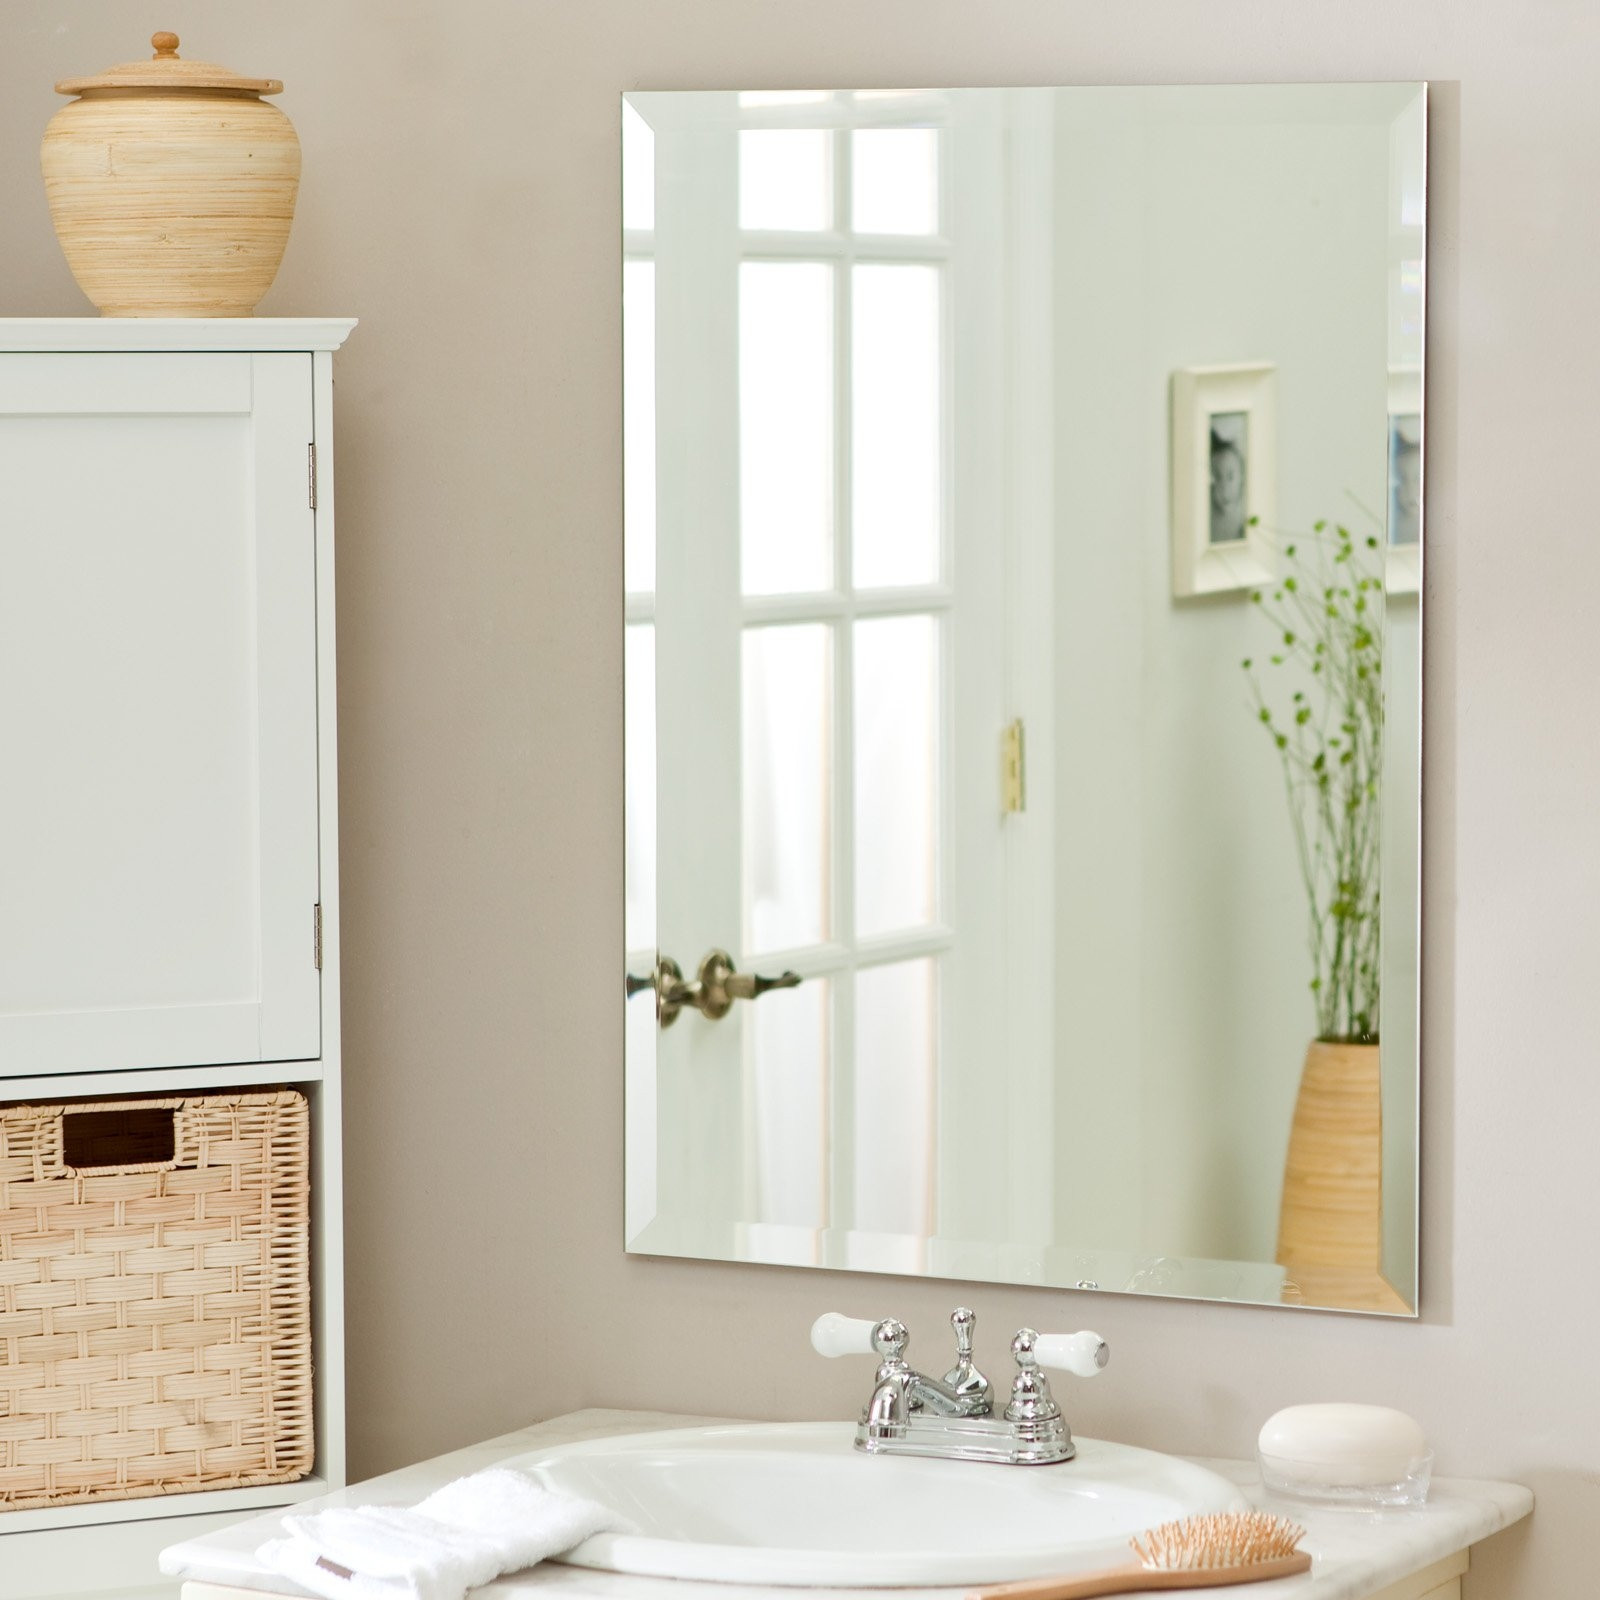 Discount Bathroom Mirror
 15 Best Collection of Cheap Mirrors